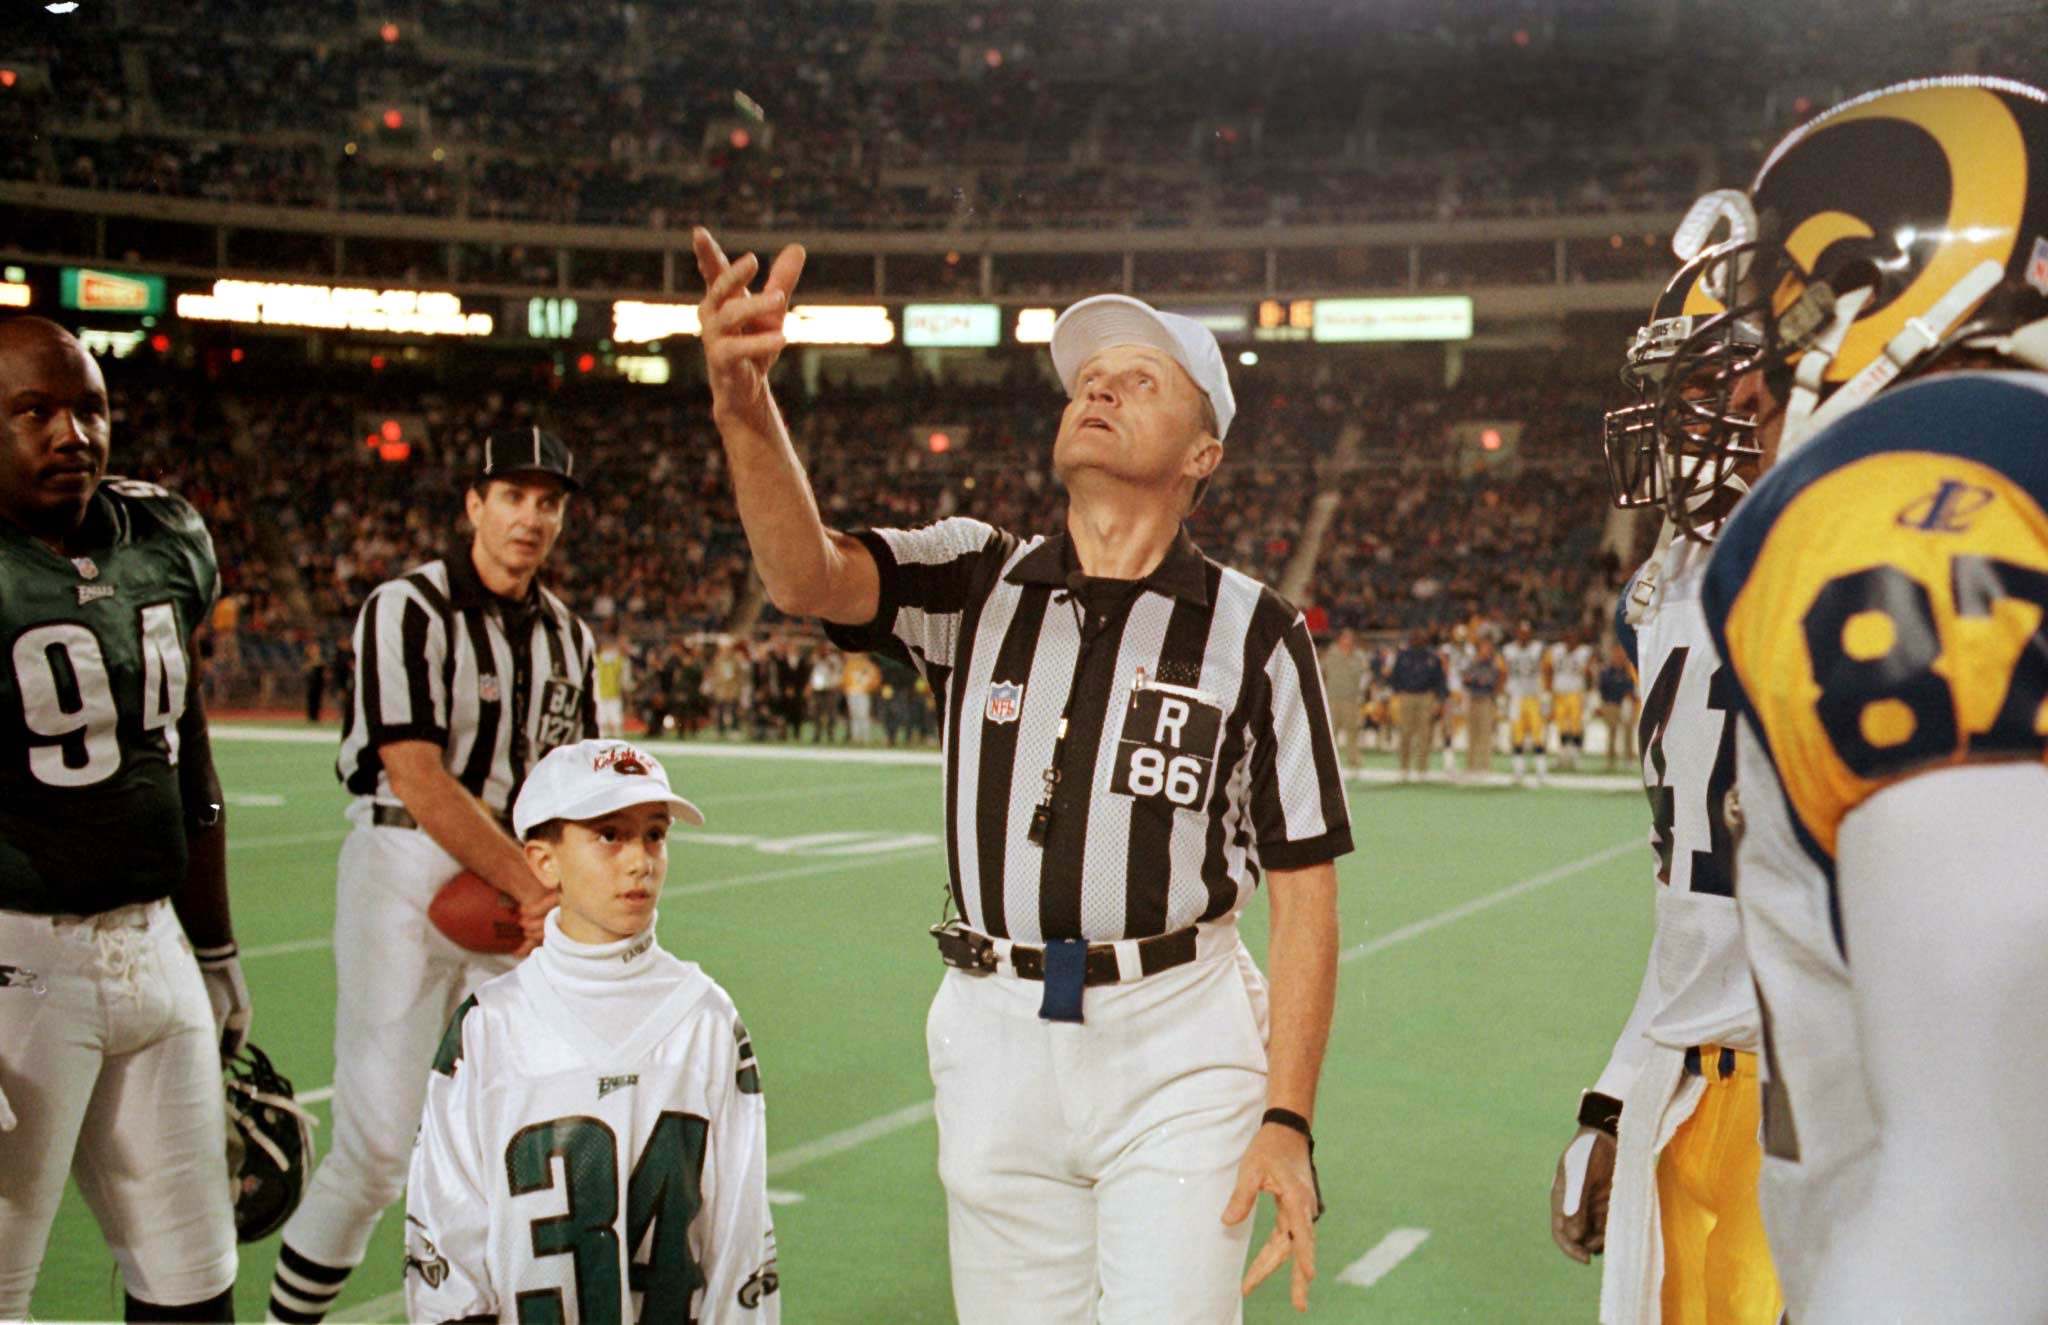 PHI02:SPORT-NFL:PHILADELPHIA,PENNSYLVANIA,3DEC98 - NFL referee Bernie Kukar (C) flips the coin at the start of the December 3 NFL game between the Philadelphia Eagles and the St. Louis Rams. The NFL instituted new rules for the coin toss following a controversial call in the November 26 game between the Detroit Lions and the Pittsburgh Steelers. Back judge Bill Leavy looks on from behind, as Eagles fan Mike Jenelli (34) looks on.

BKS